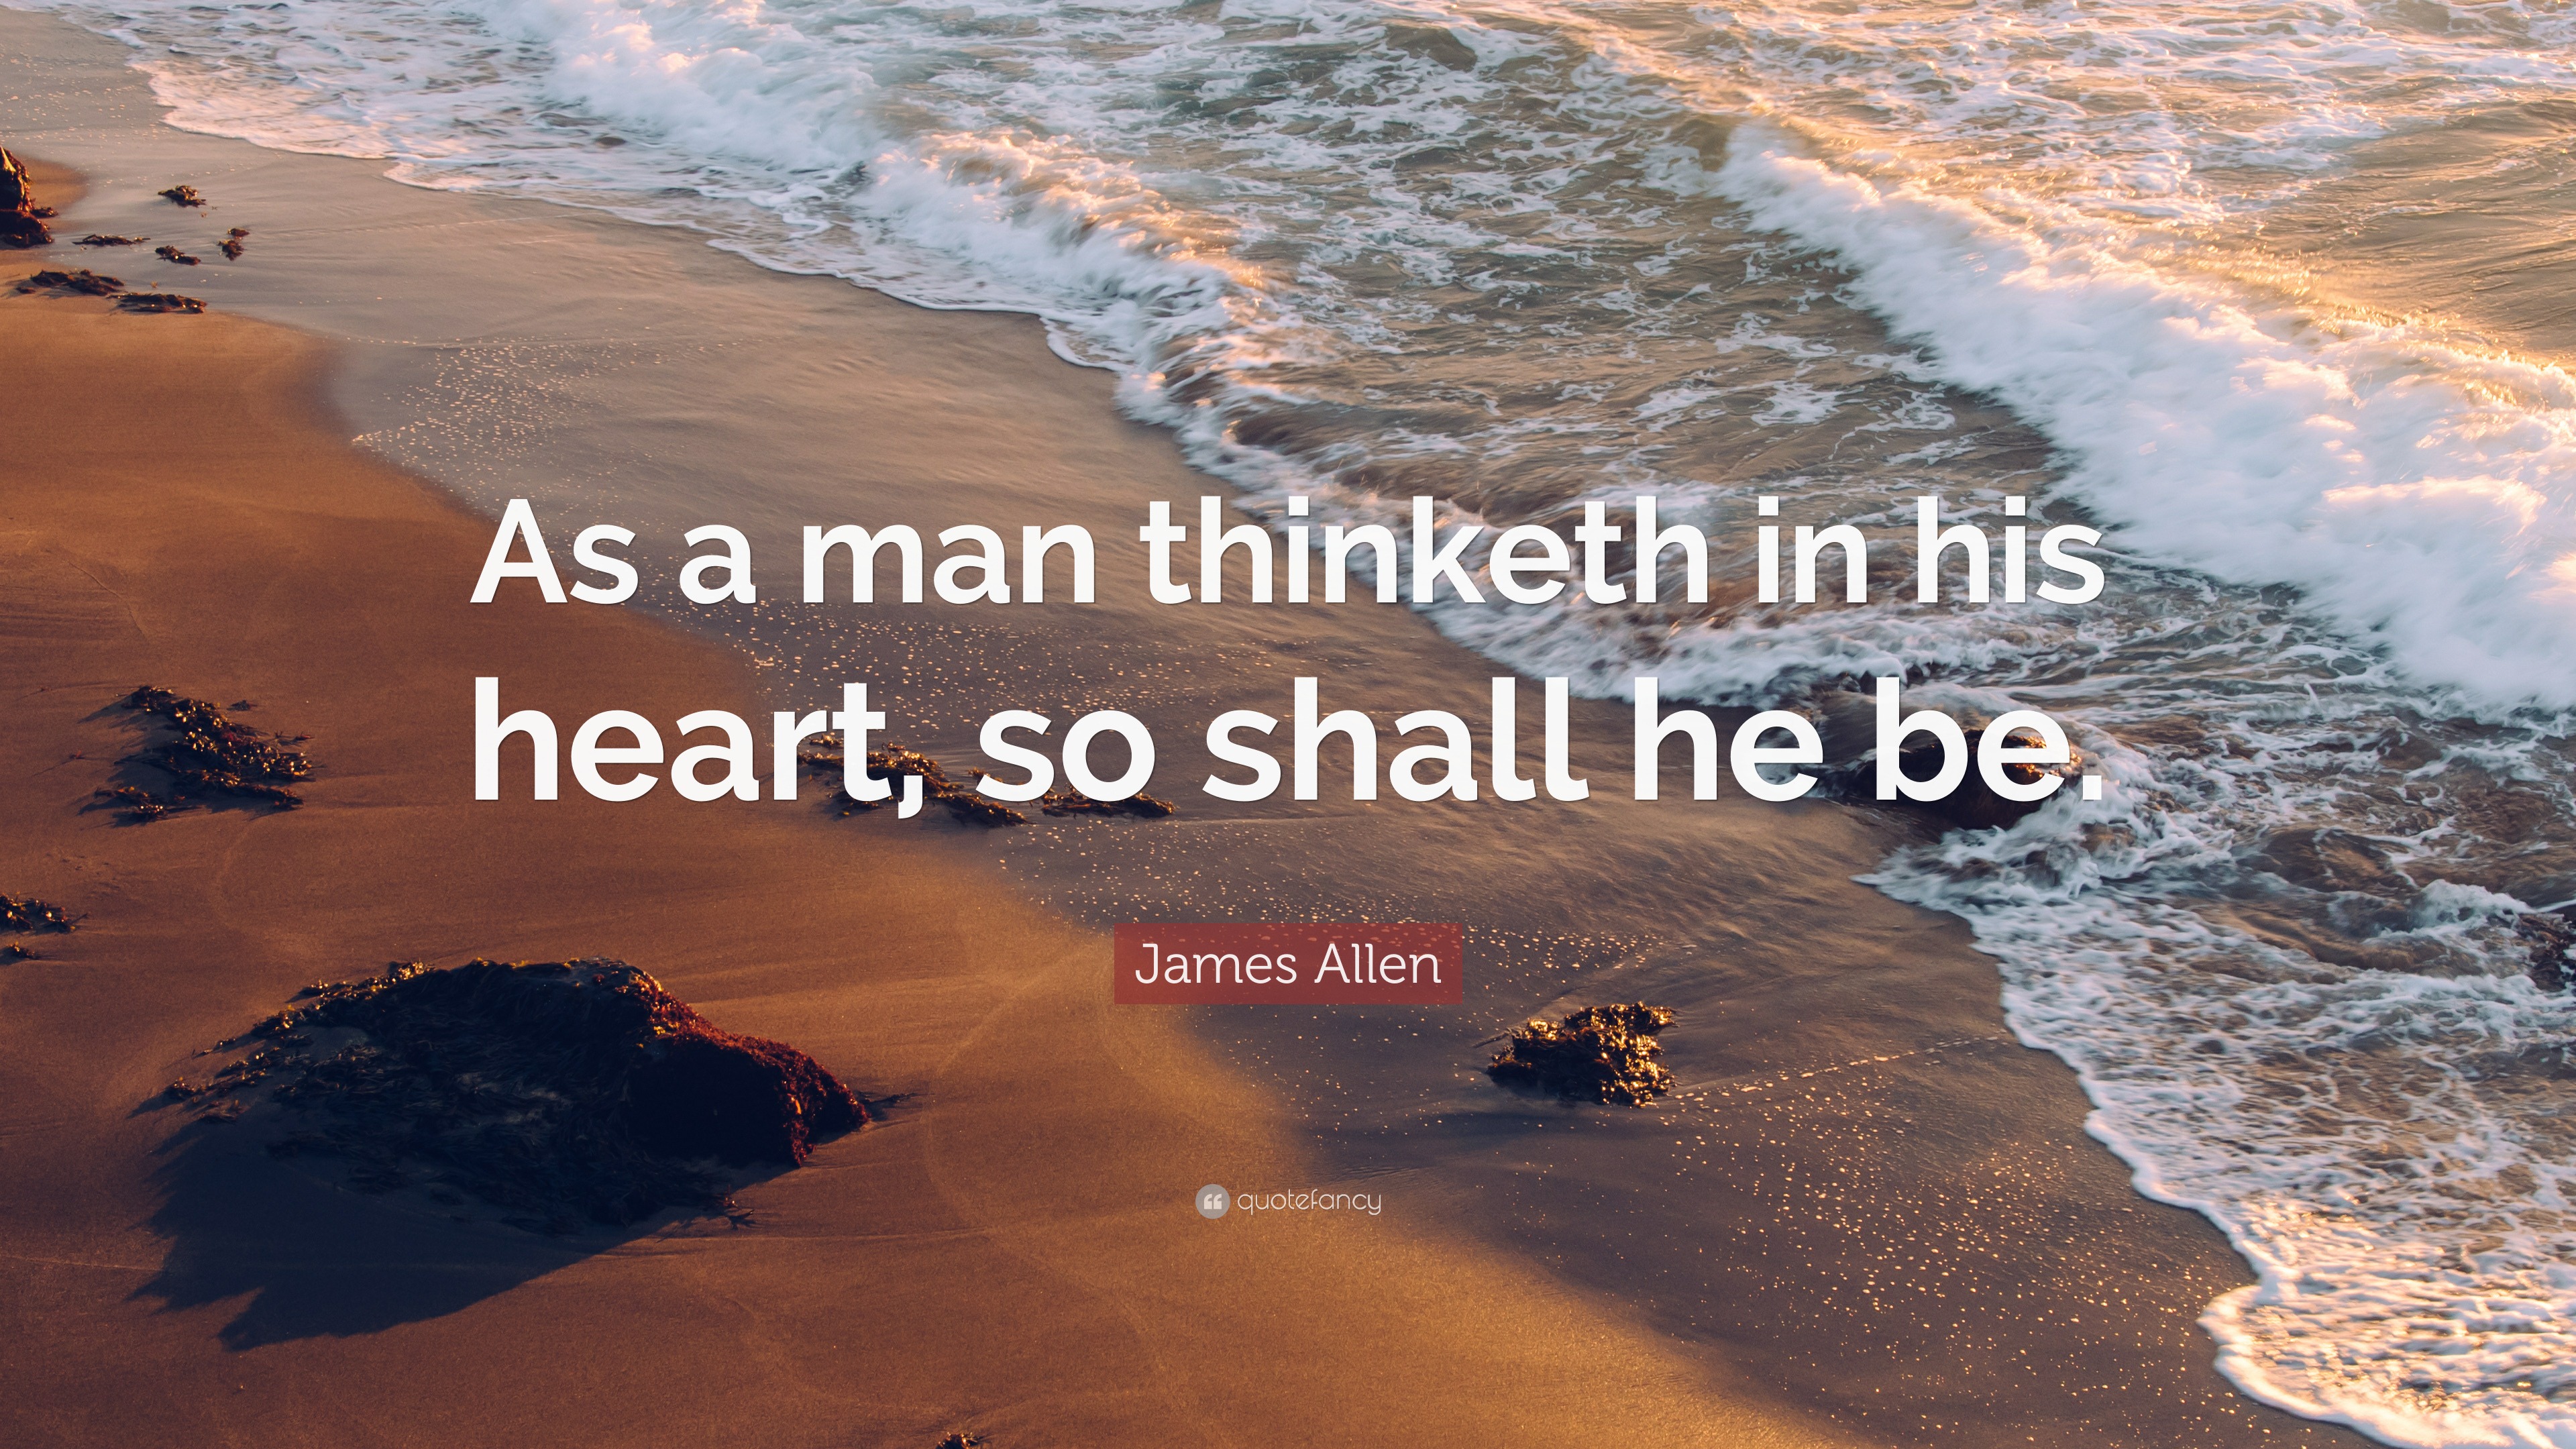 as a man thinketh, so shall he be. Be careful of your thoughts, they create your reality